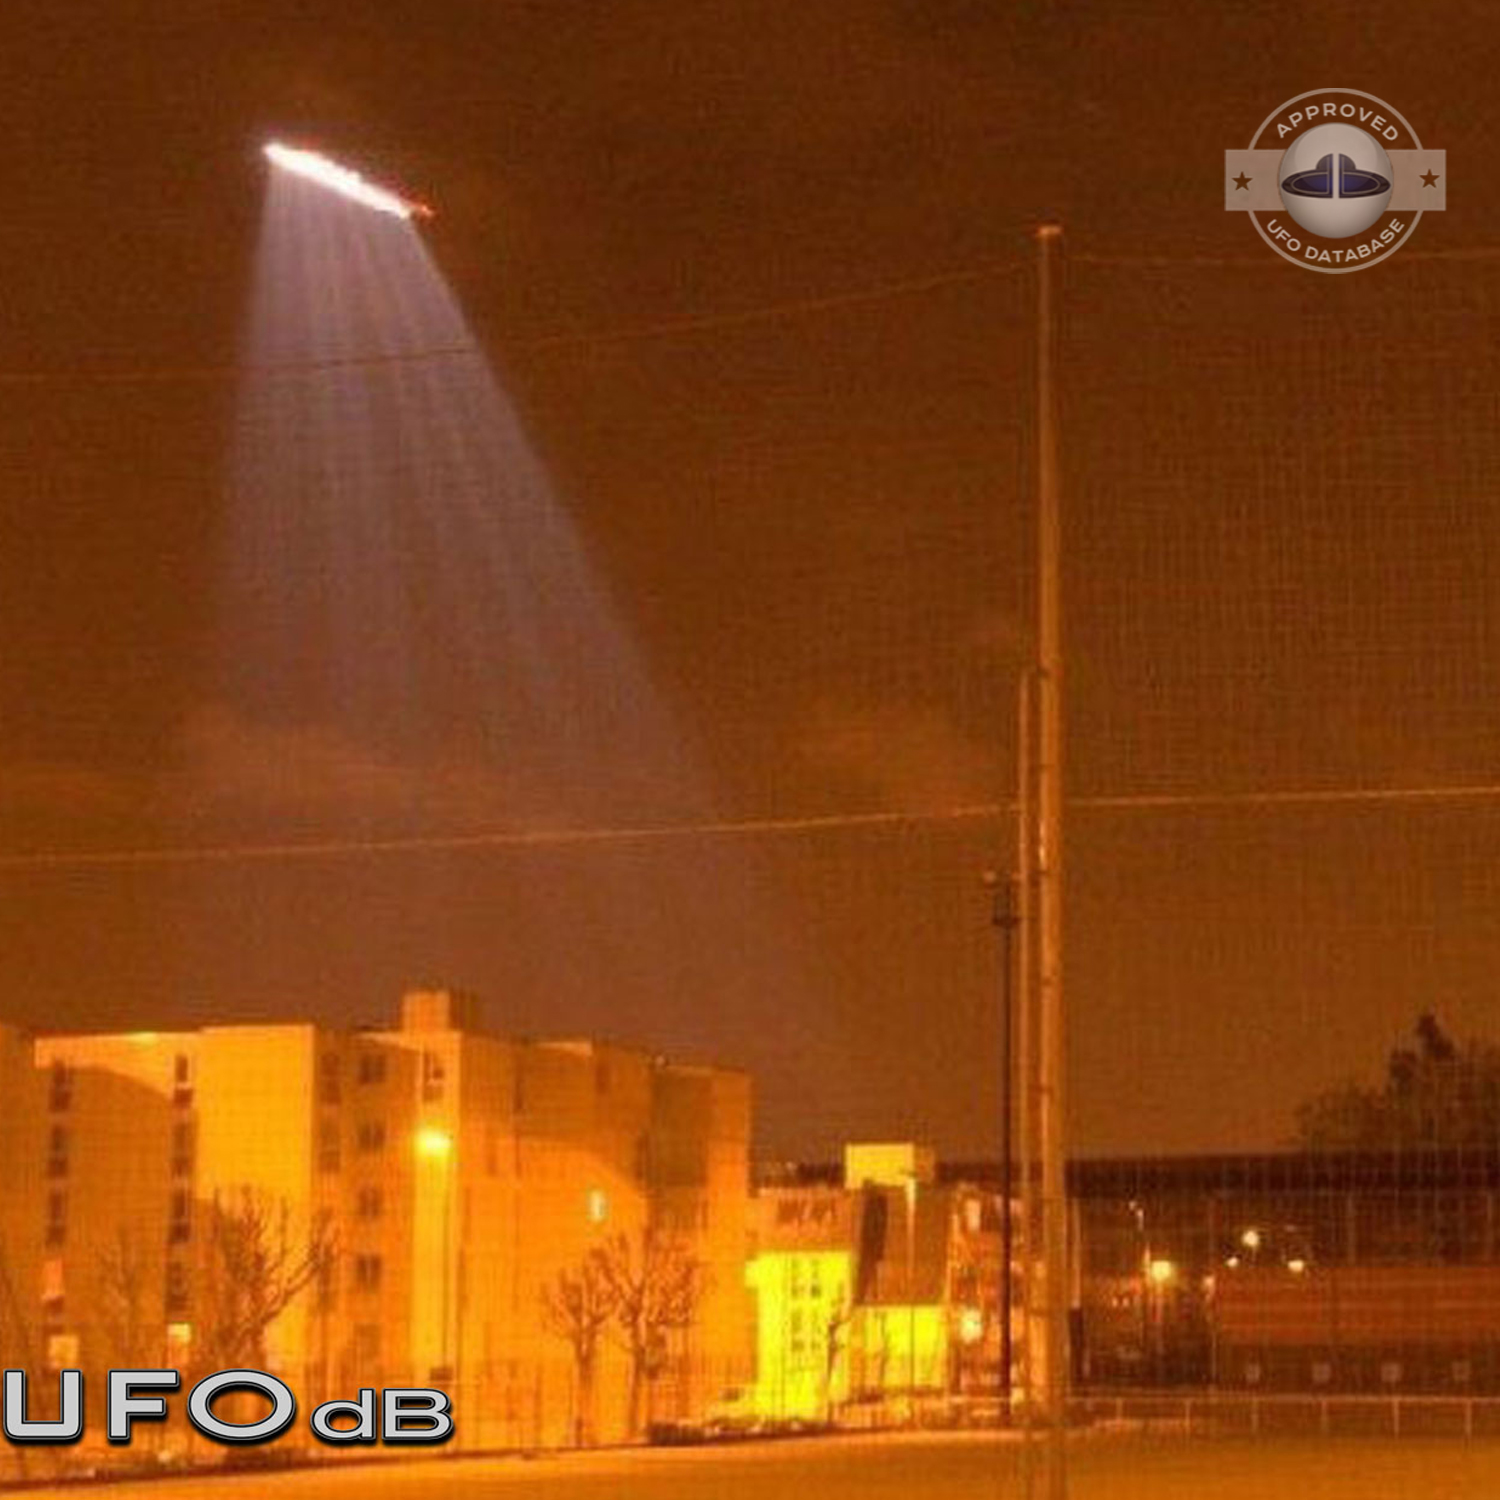 UFO sighted at 9 pm, causing the rerouting of flights to other cities UFO Picture #78-2